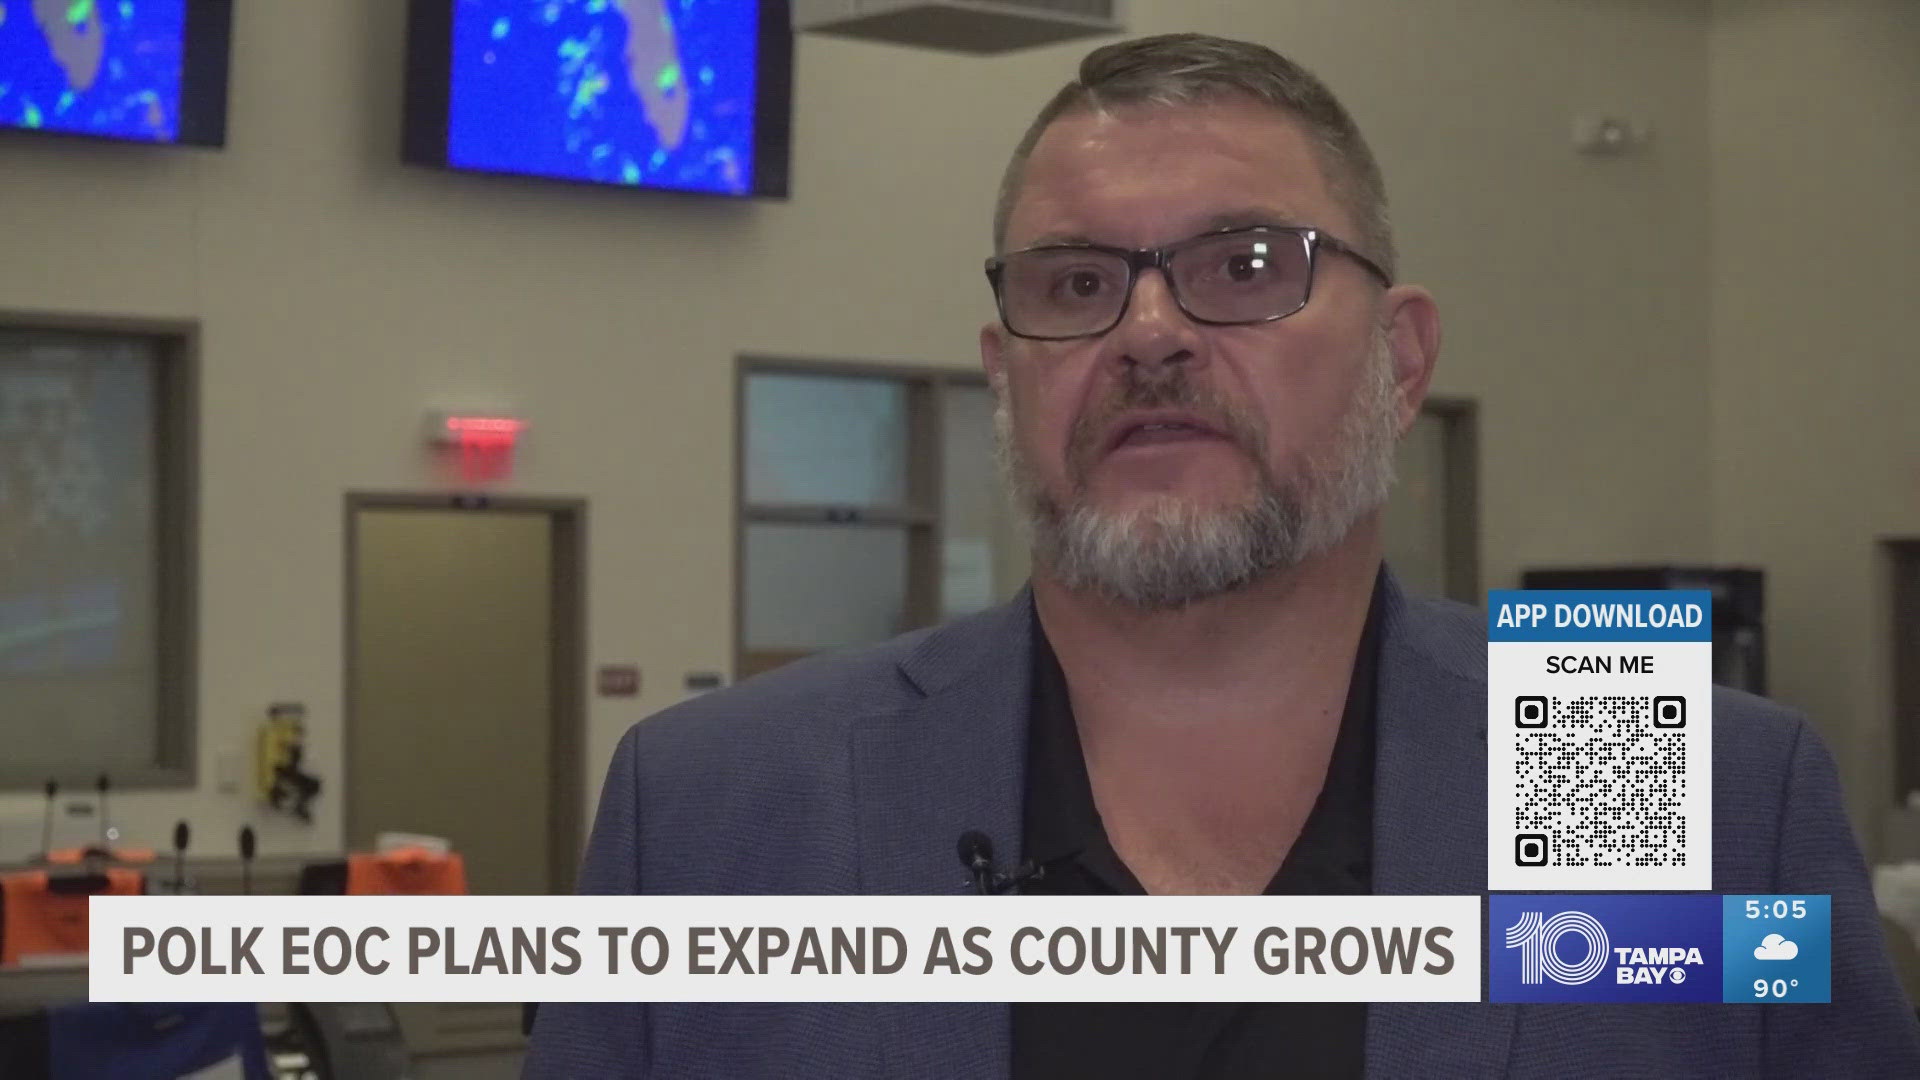 The Polk County emergency operations center plans to expand as the county grows.